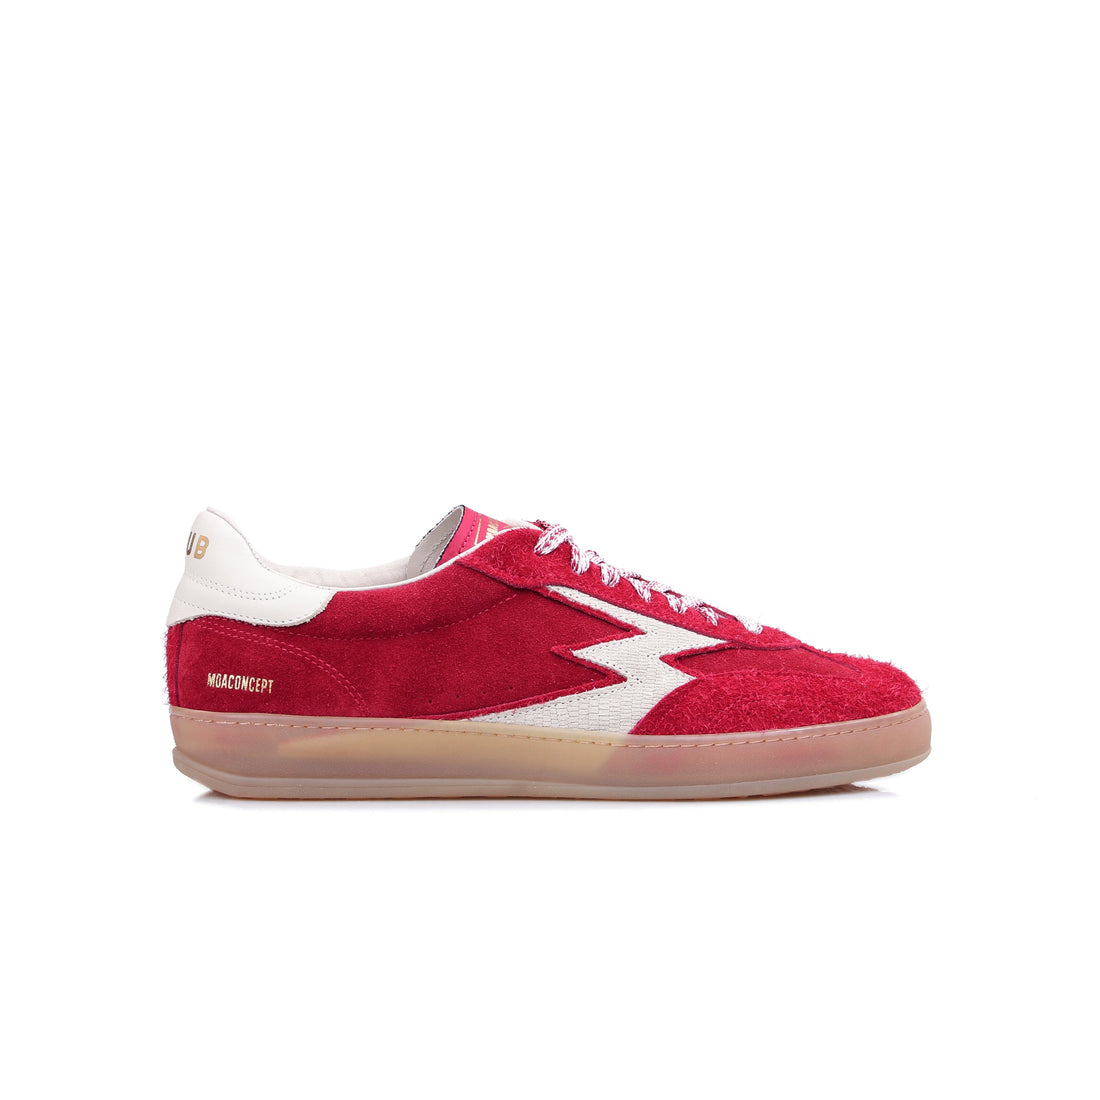 Club Red sneakers with off-White logo